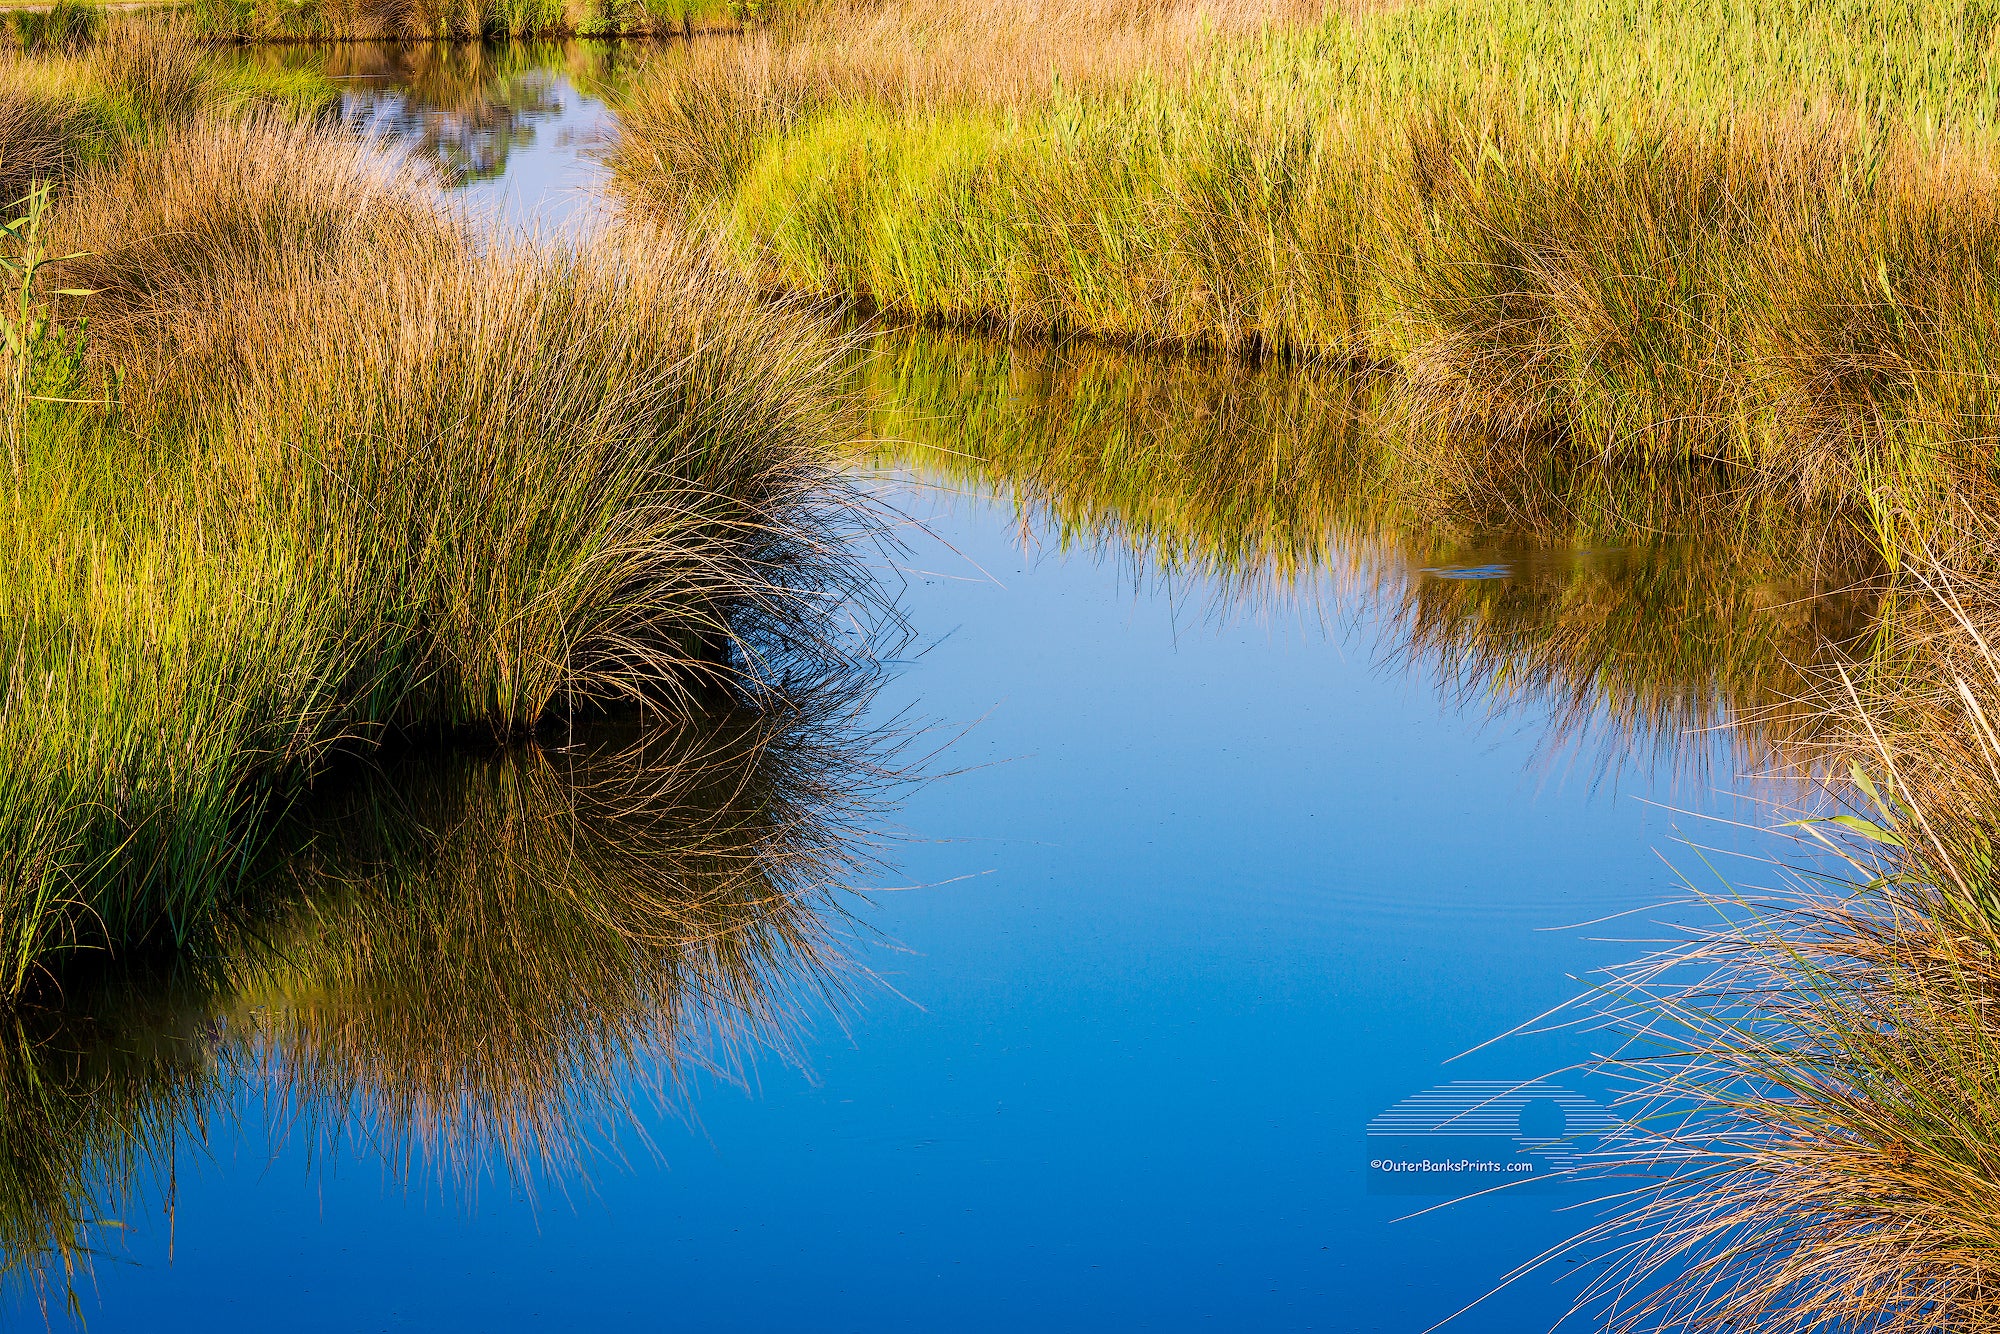 This marshy Creek was photographed in Wanchese on the Outer Banks of North Carolina.